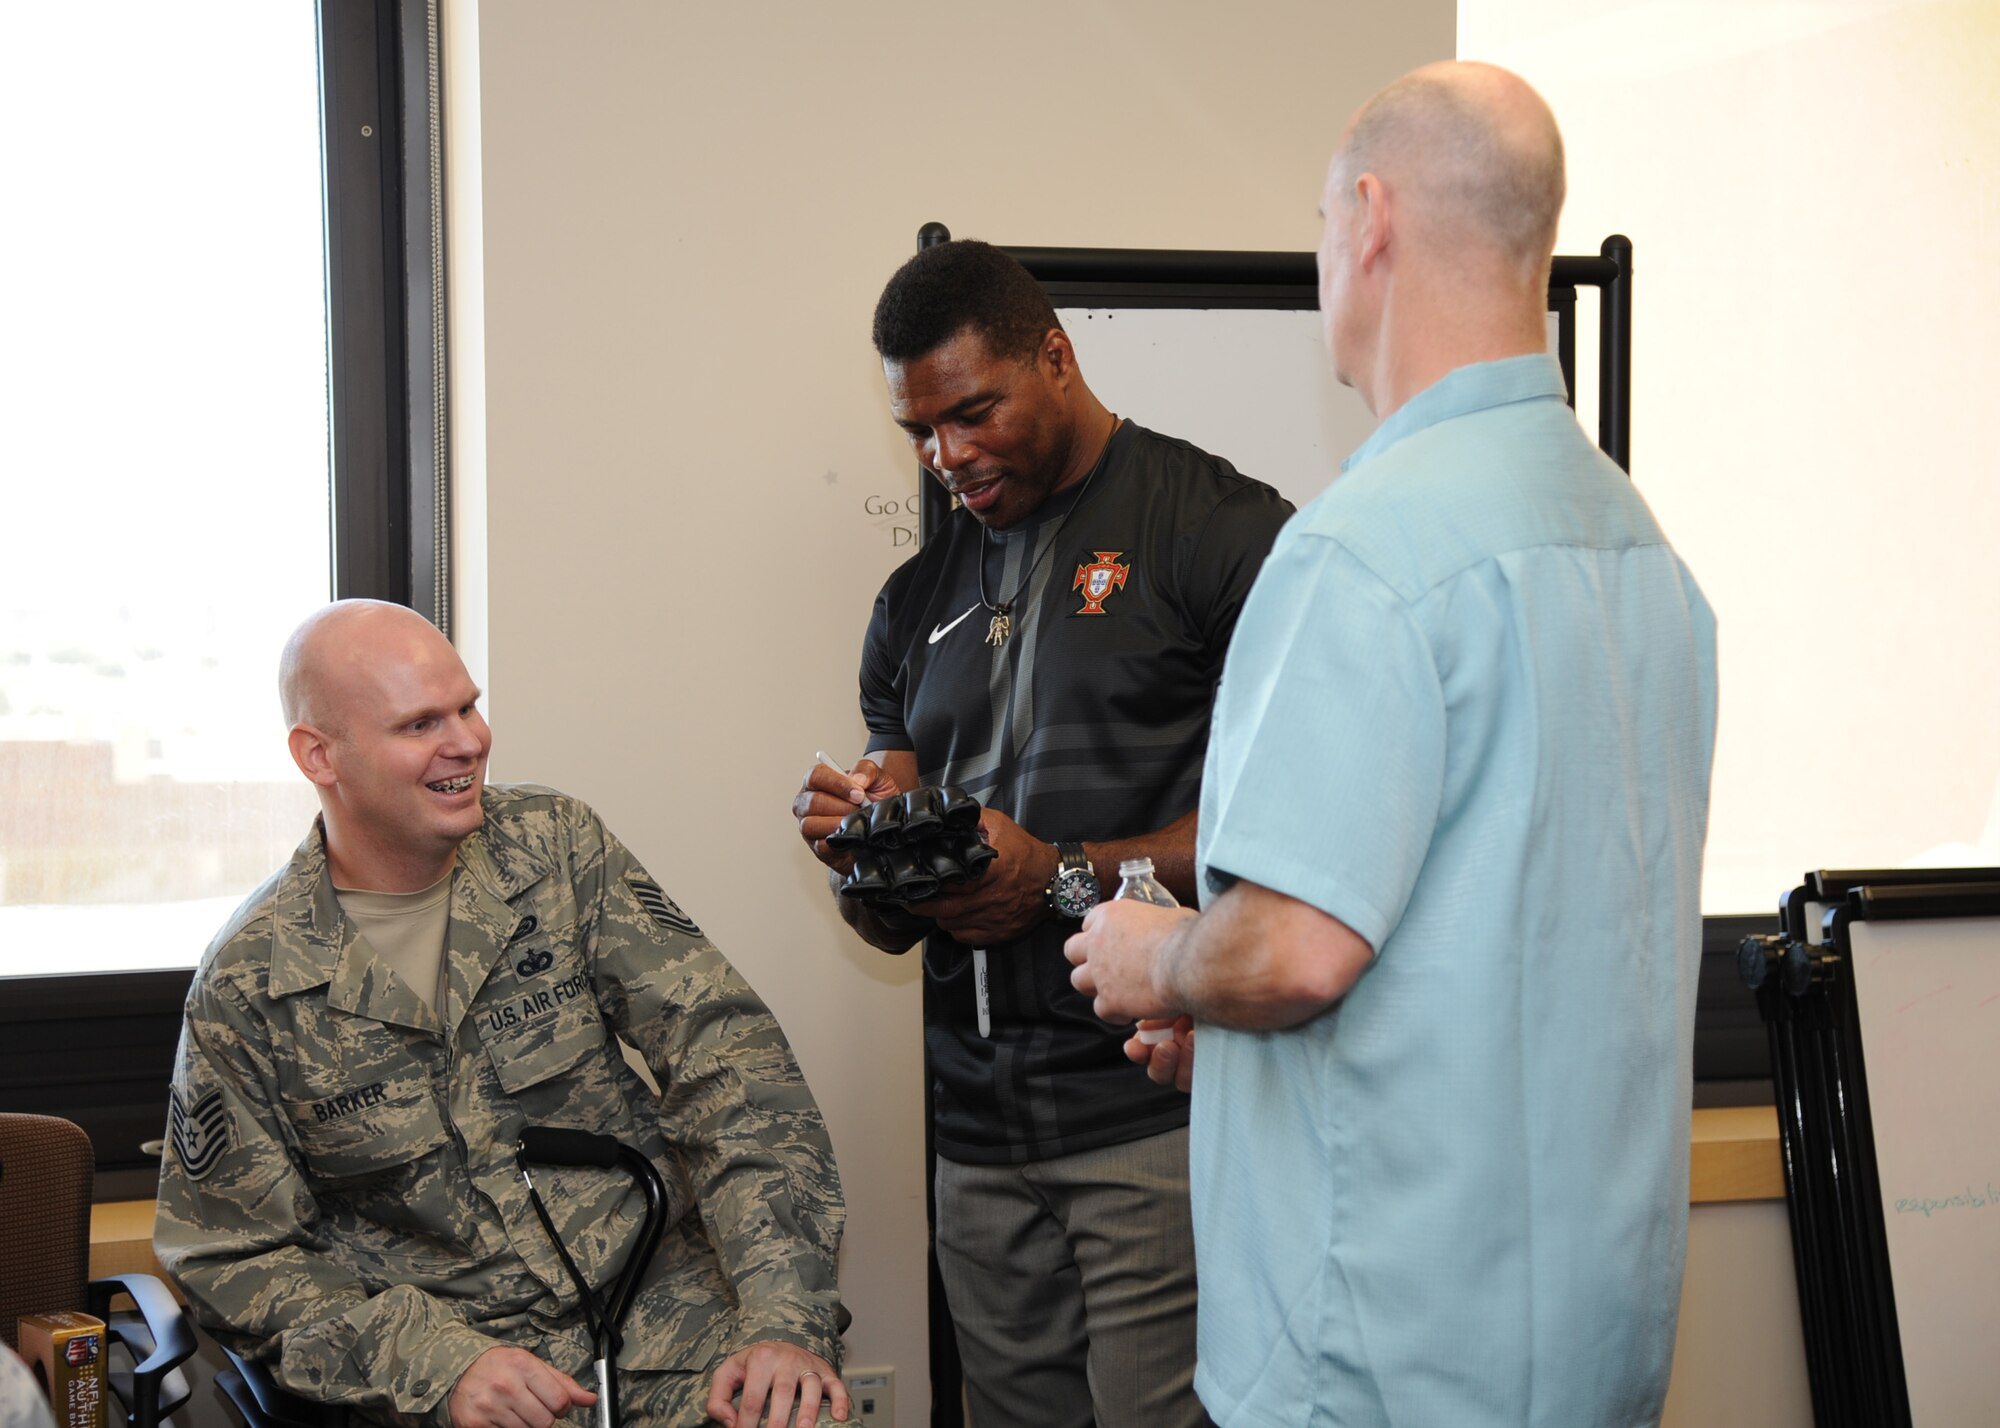 Herschel Walker, center, signs an autograph for Tech. Sgt. Christopher Barker and his father Daniel Barker Oct. 23, 2013, during a recent visit to the Wilford Hall Ambulatory Surgical Center Oct. 23, 2013, at Joint Base San Antonio-Lackland, Texas. Earlier in the day, Barker was presented with the distinguished Purple Heart for wounds sustained in action. Barker is a member of the 59th Medical Wing Patient Squadron. 